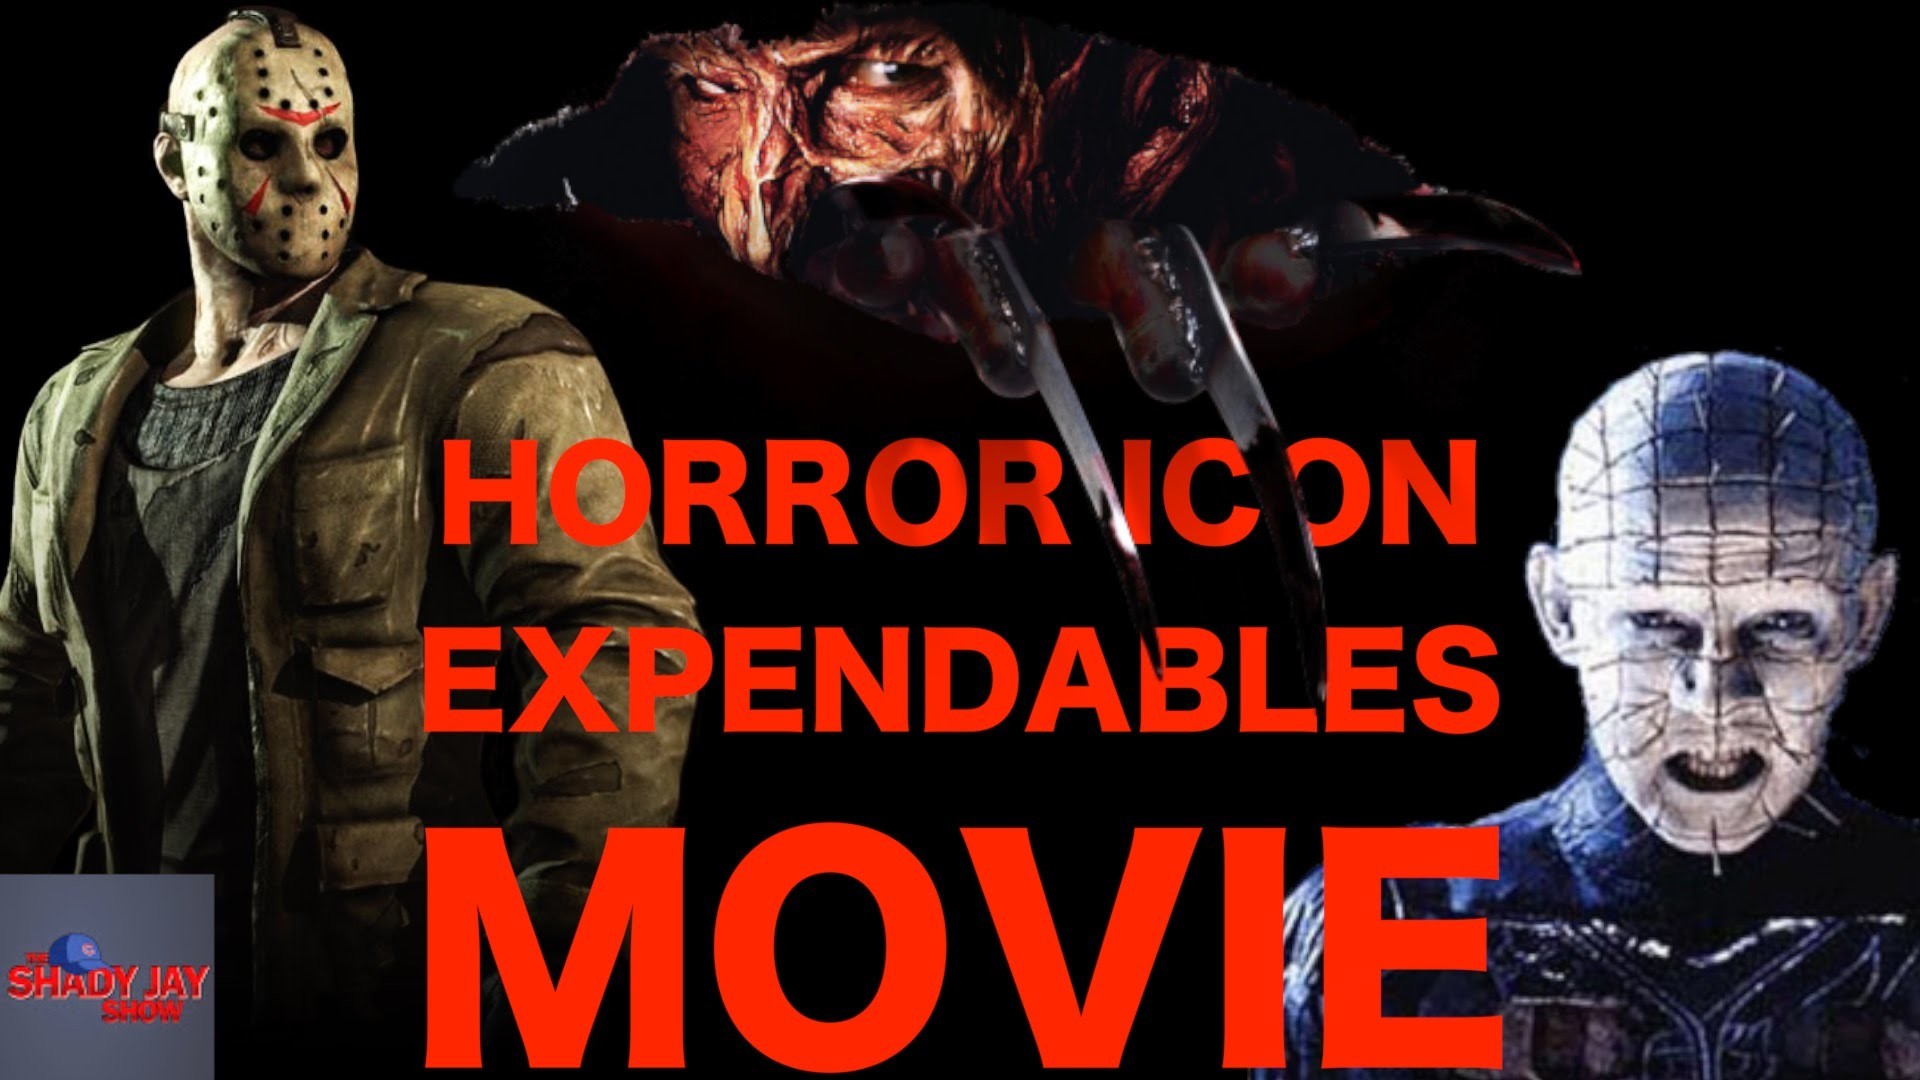 HORROR ICON EXPENDABLES MOVIE